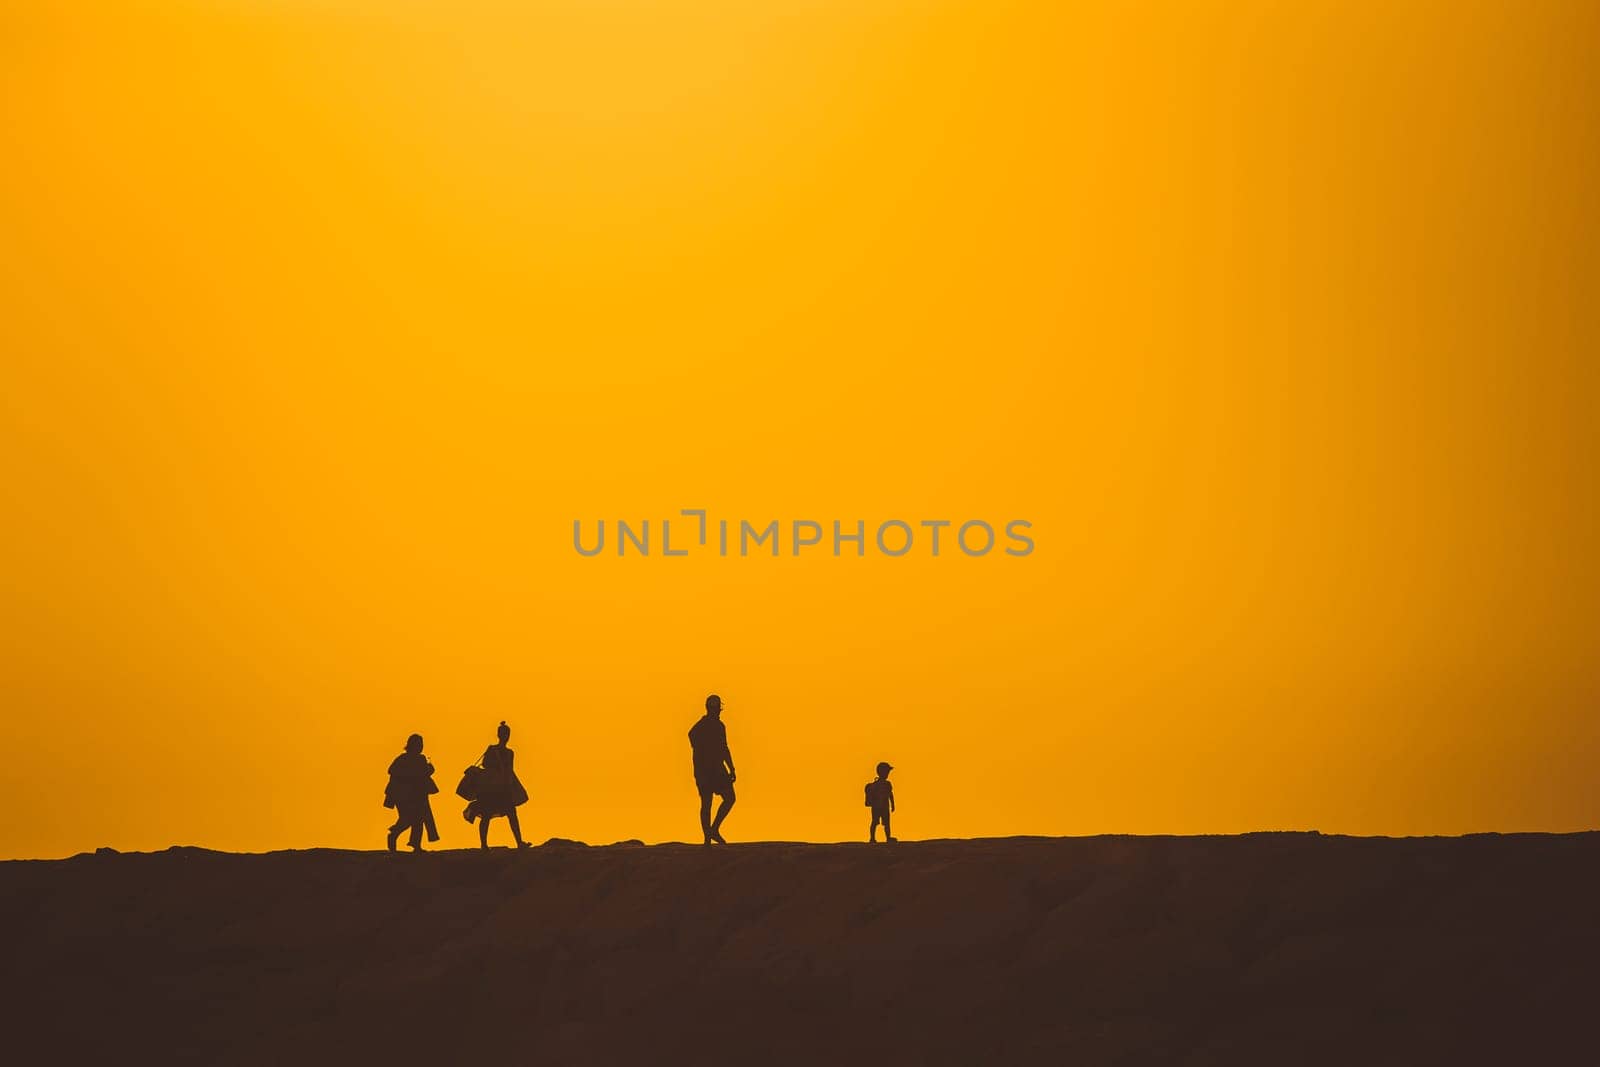 Silhouettes of people walking on a hill at a bright sunset. Mid shot